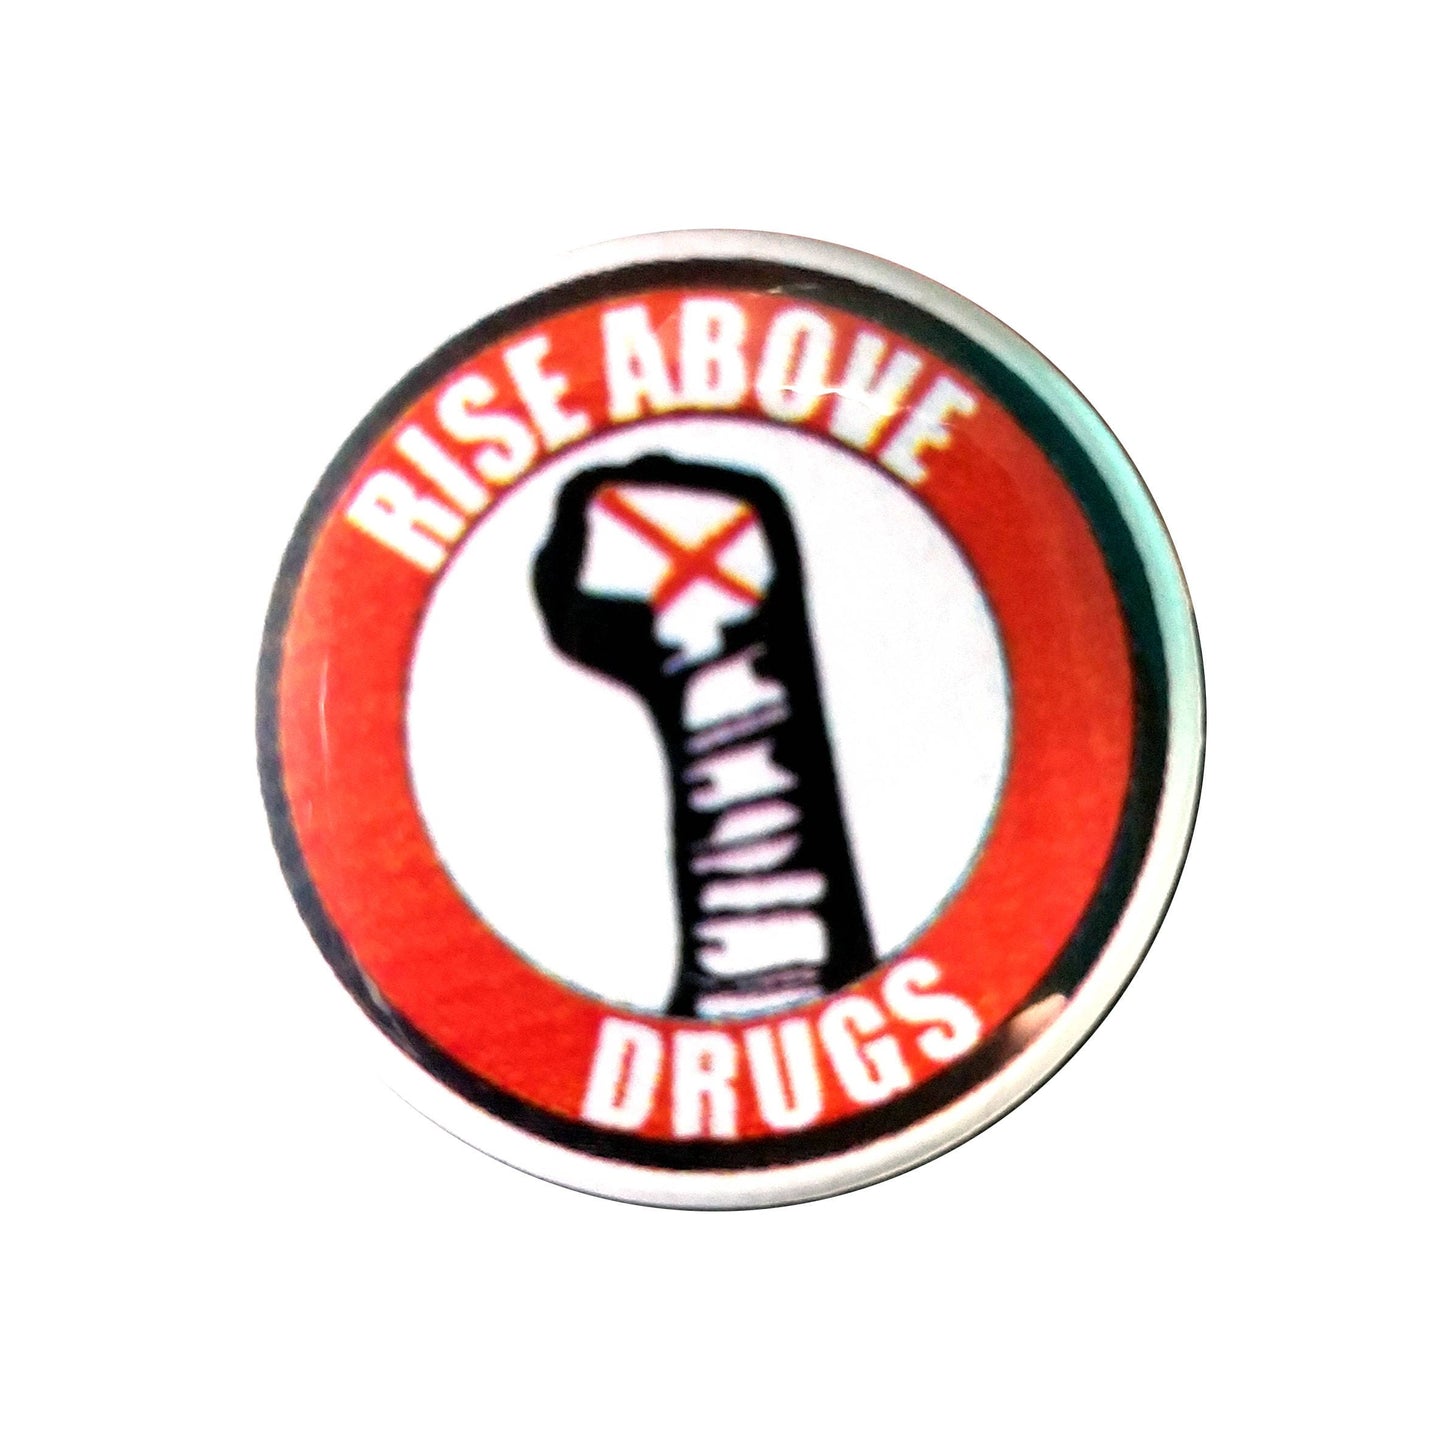 Rise Above Drugs 1 inch button